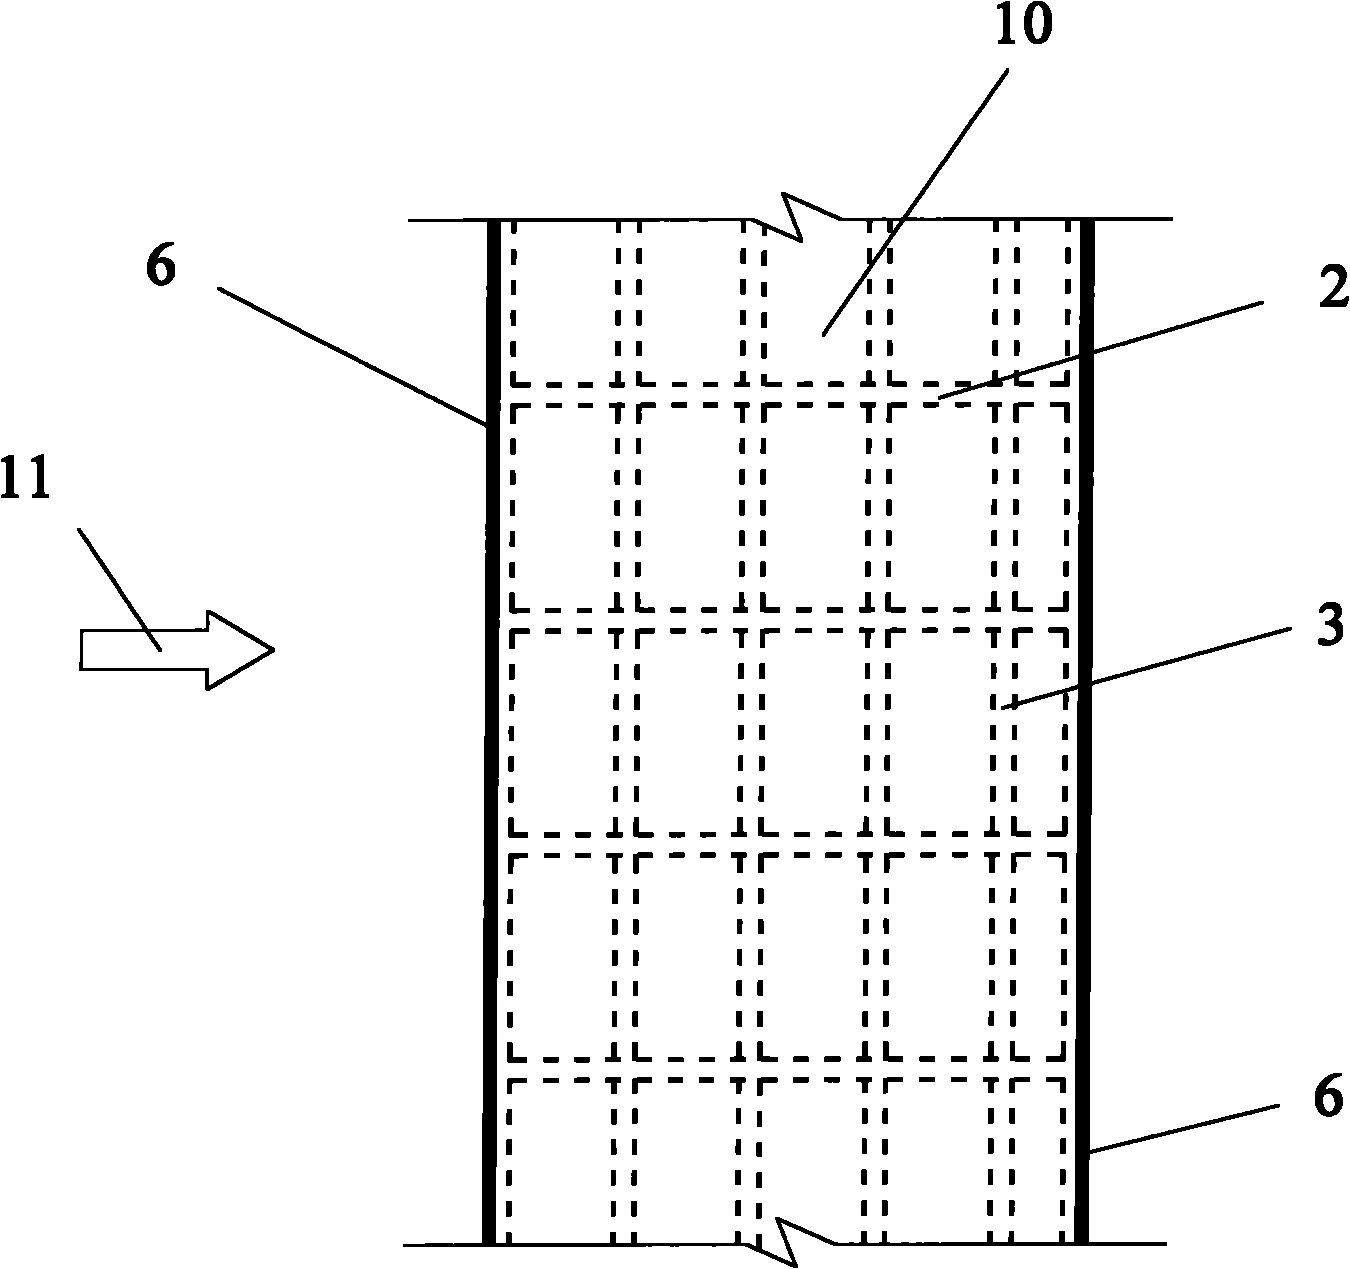 Permeable overflow dam combining functions of water level control and water purification